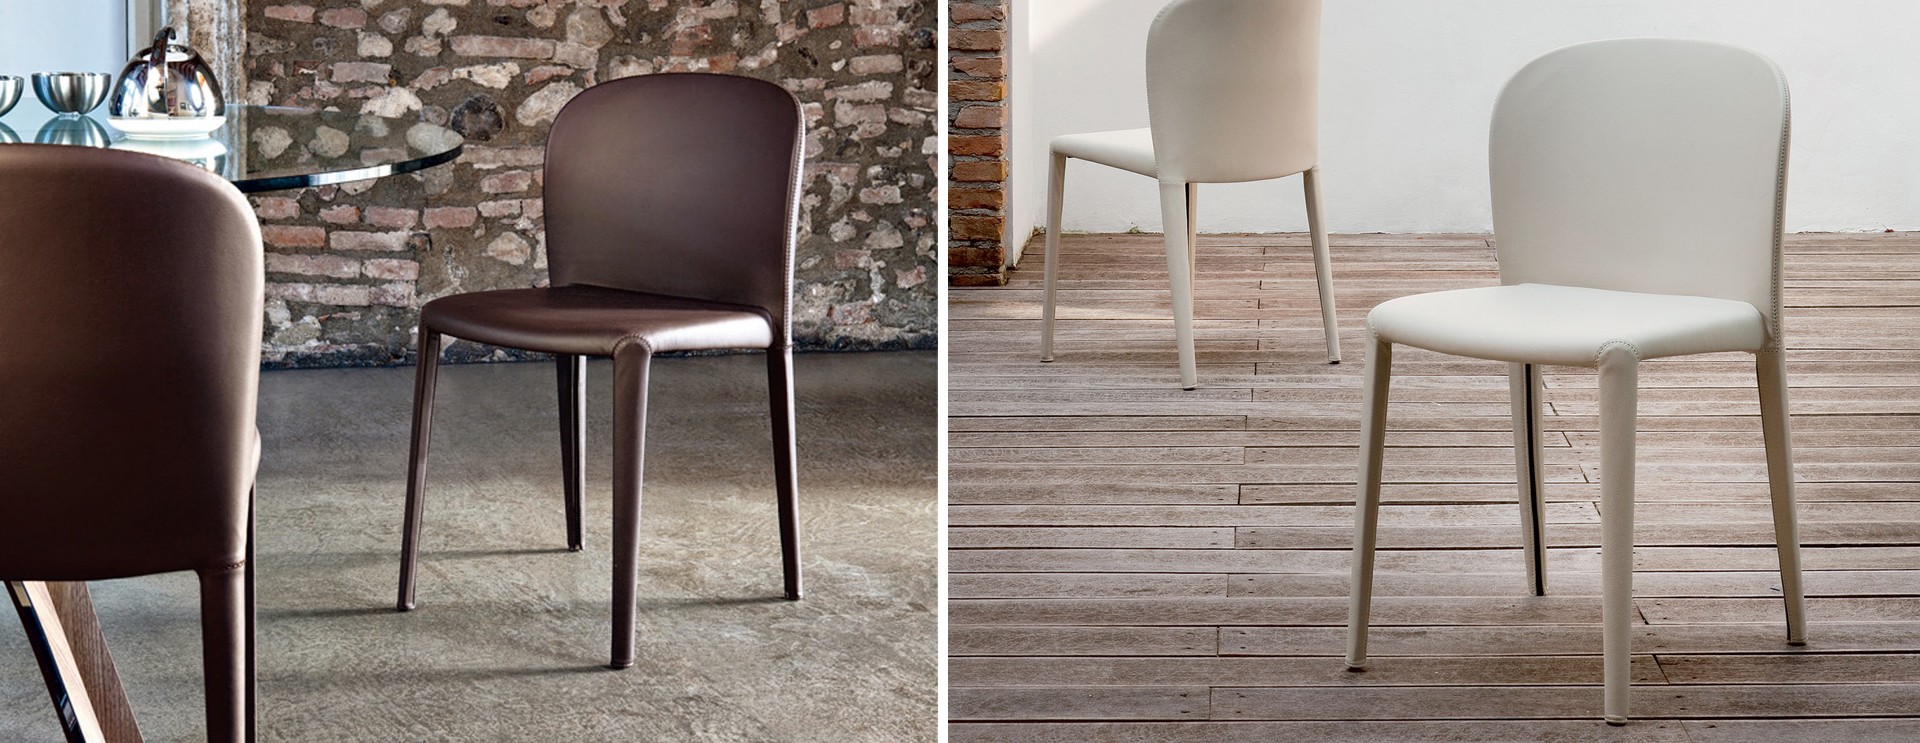 Daisy Dining Chair by Cattelan Italia